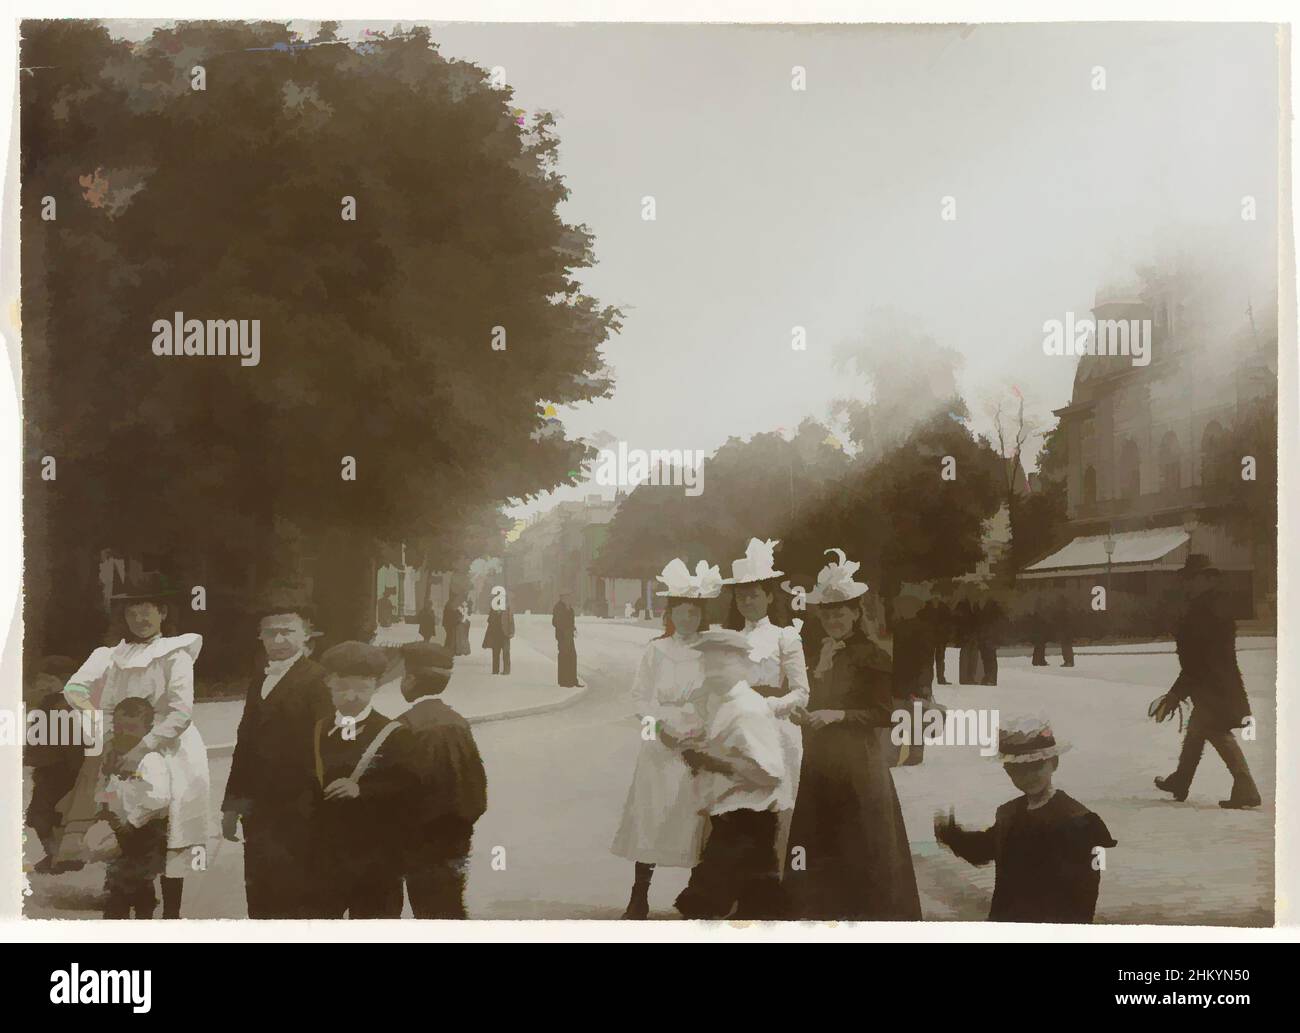 Art inspired by People on the street in front of the Musis Sacrum in Arnhem, Several neatly dressed children in front of the Musis Sacrum in Arnhem., Arnhem, c. 1900, photographic support, height 115 mm × width 160 mm, Classic works modernized by Artotop with a splash of modernity. Shapes, color and value, eye-catching visual impact on art. Emotions through freedom of artworks in a contemporary way. A timeless message pursuing a wildly creative new direction. Artists turning to the digital medium and creating the Artotop NFT Stock Photo